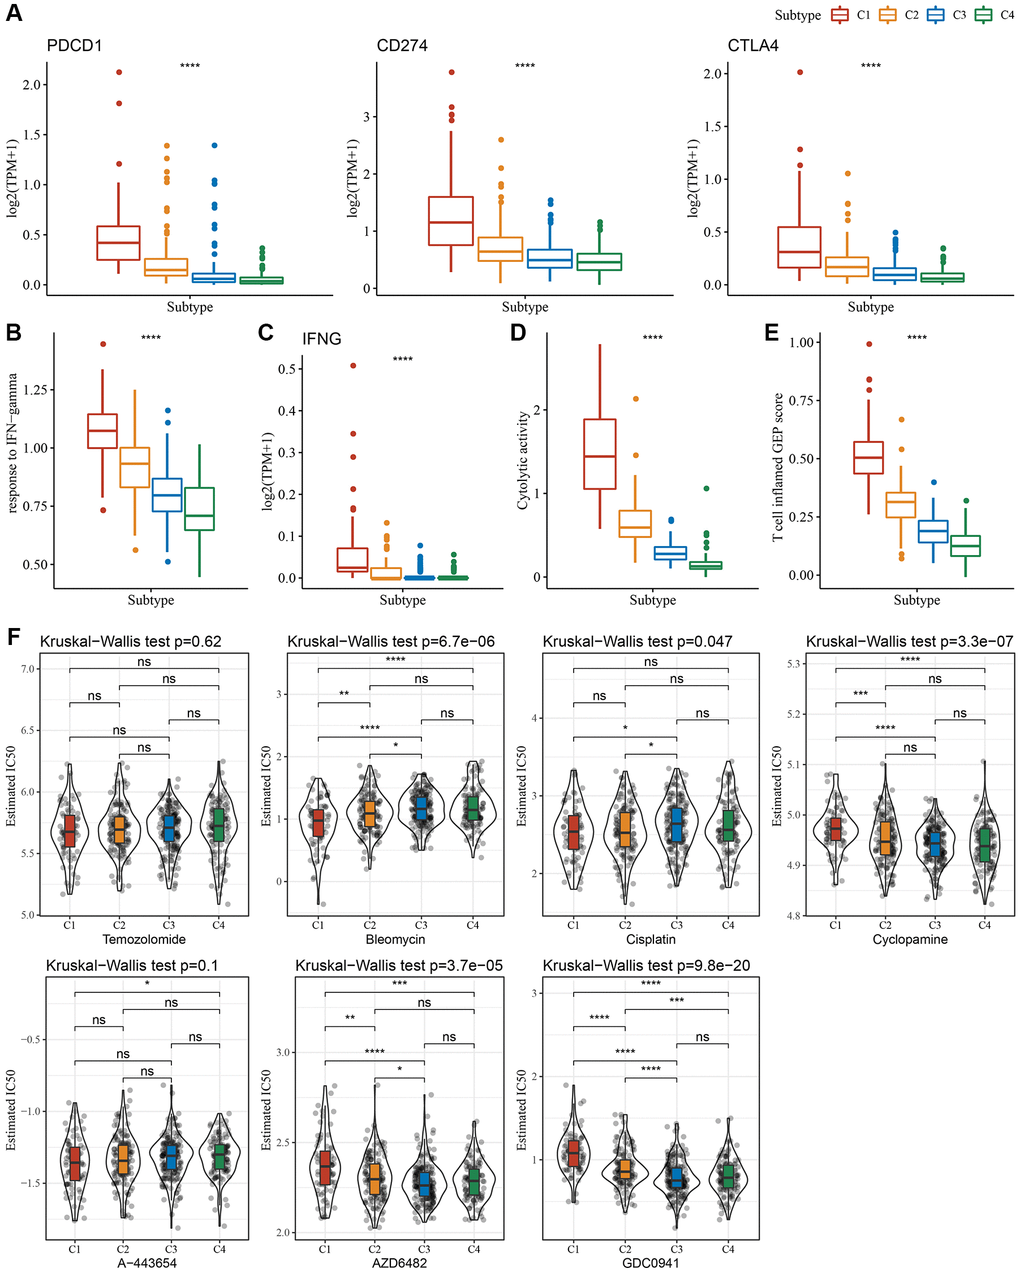 Immunological characteristics scores characterizing the effect of immunotherapy in different subtypes. (A) Expression differences of immune checkpoint-related genes among molecular subtypes. (B) Variation in response to IFN-γ among molecular subtypes. (C) The difference in expression of IFNG gene among molecular subtypes. (D) Differences in “Cytolytic activity” among molecular subtypes. (E) Variation in the T cell inflamed GEP score among molecular subtypes. (F) A box plot of the estimated IC50 values for temozolomide, bleomycin, cisplatin, cyclopamine, A-443654, AZD6482, and GDC0941 in TCGA-LGG. *P **P ***P ****P 50: half-maximal inhibitory concentration; TCGA: The Cancer Genome Atlas; LGG: low-grade glioma.